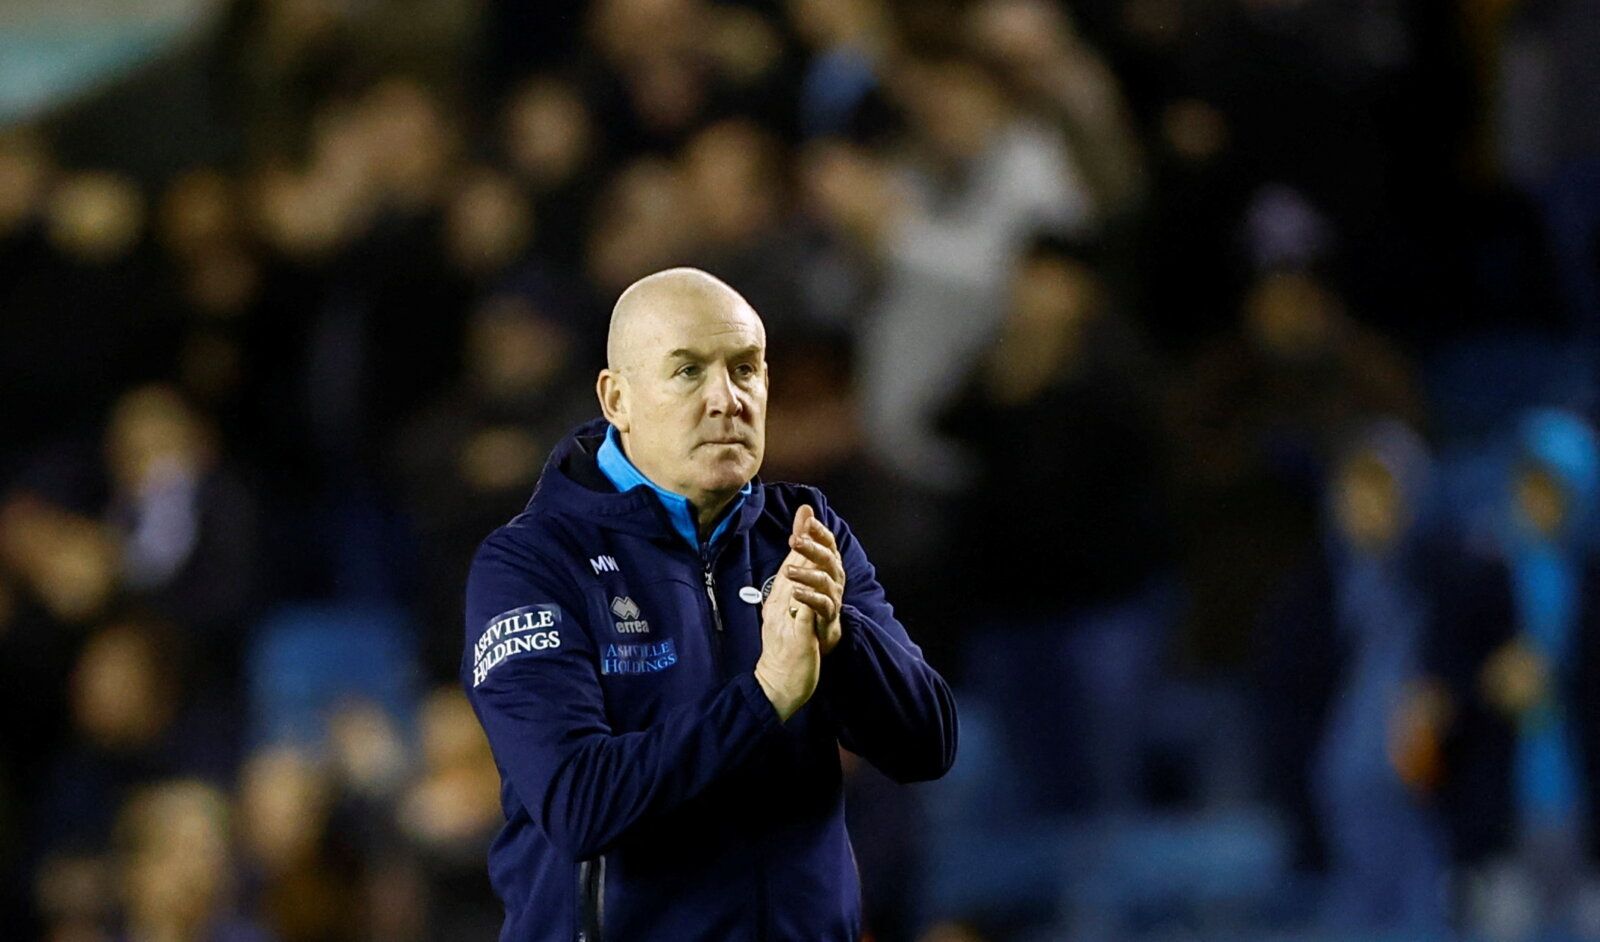 Soccer Football - Championship - Millwall v Queens Park Rangers - The Den, London, Britain - February 15, 2022 Queens Park Rangers' manager Mark Warburton Action Images/Andrew Boyers  EDITORIAL USE ONLY. No use with unauthorized audio, video, data, fixture lists, club/league logos or 